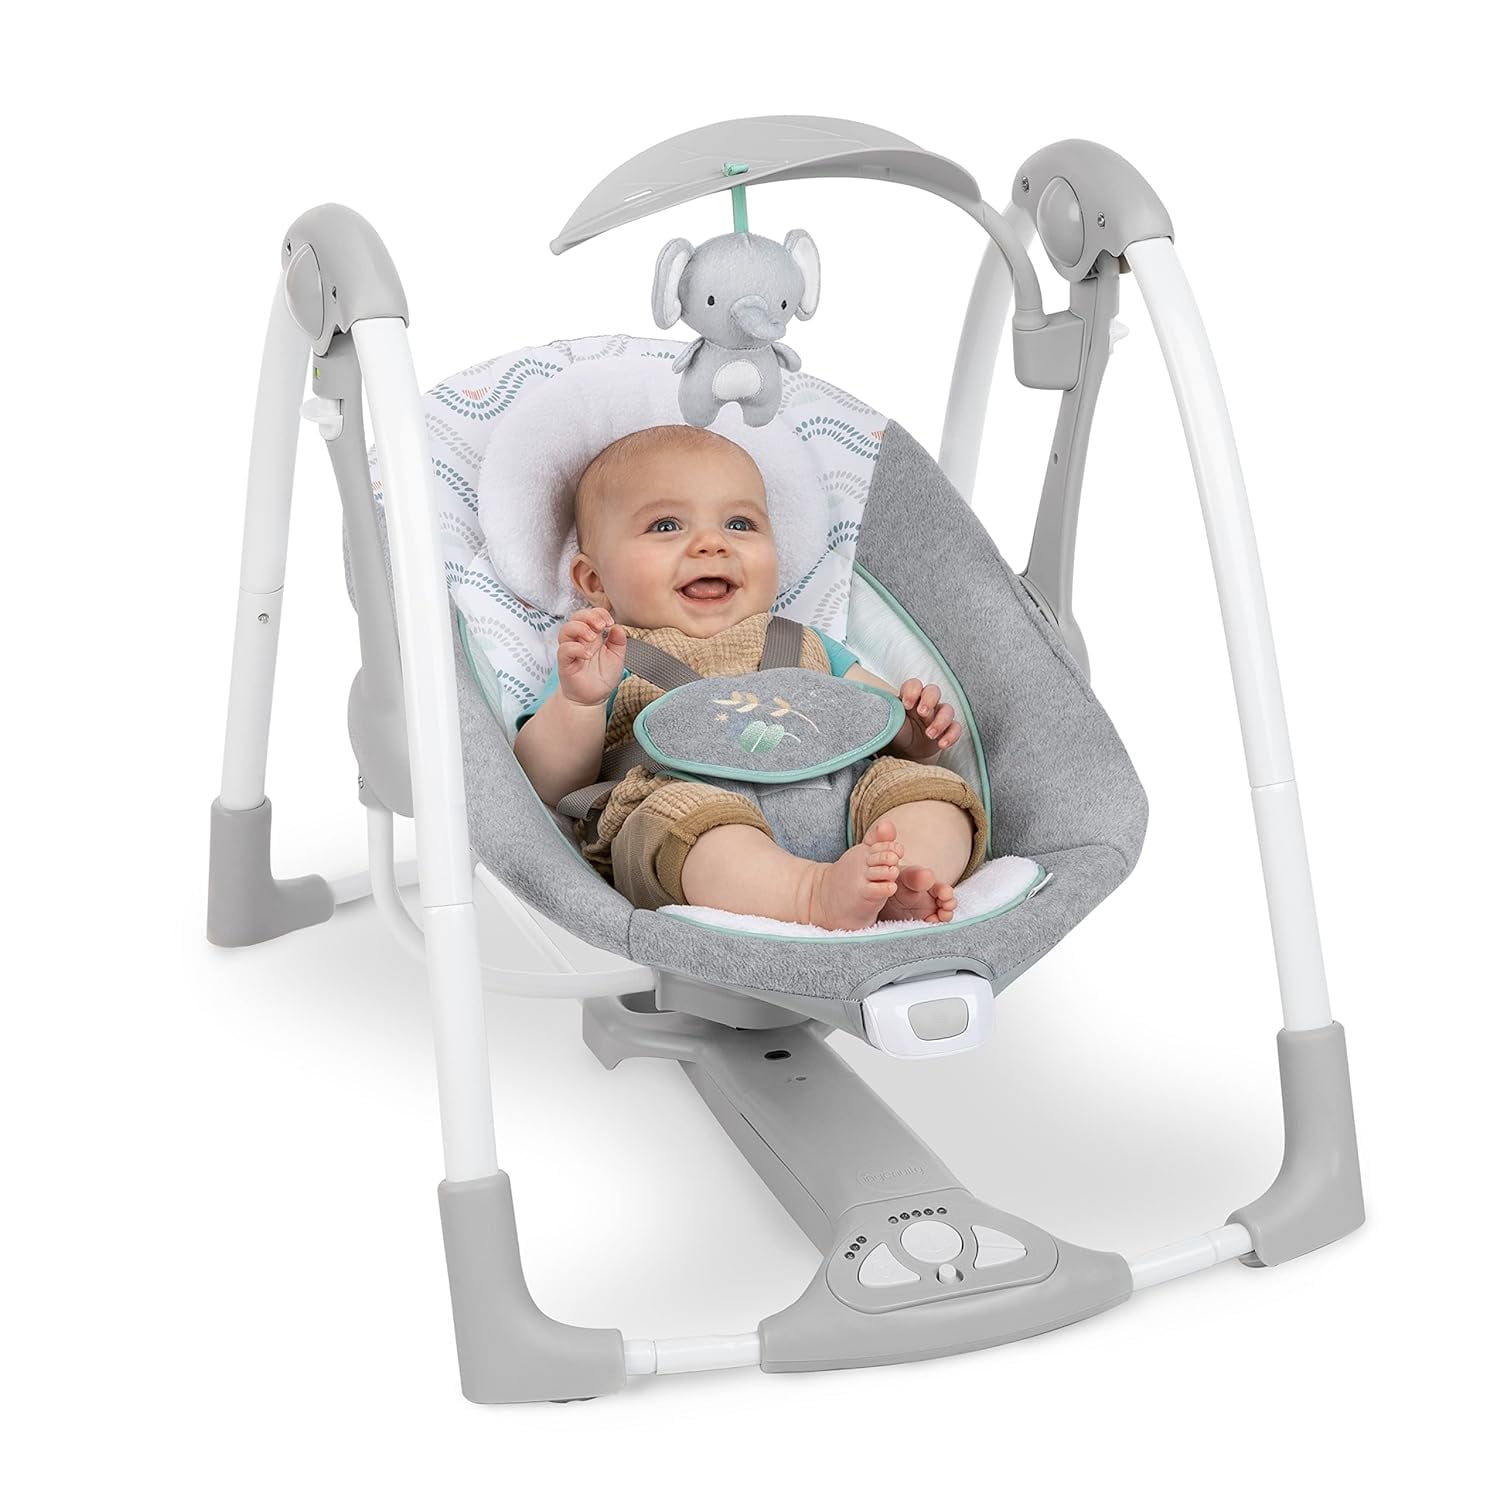 2-in-1 Seat, ConvertMe Compact Battery-Saving Baby Infant Months Swing (Swell) lbs Portable 0-9 Sounds, Nature Vibrations, Automatic & Ingenuity